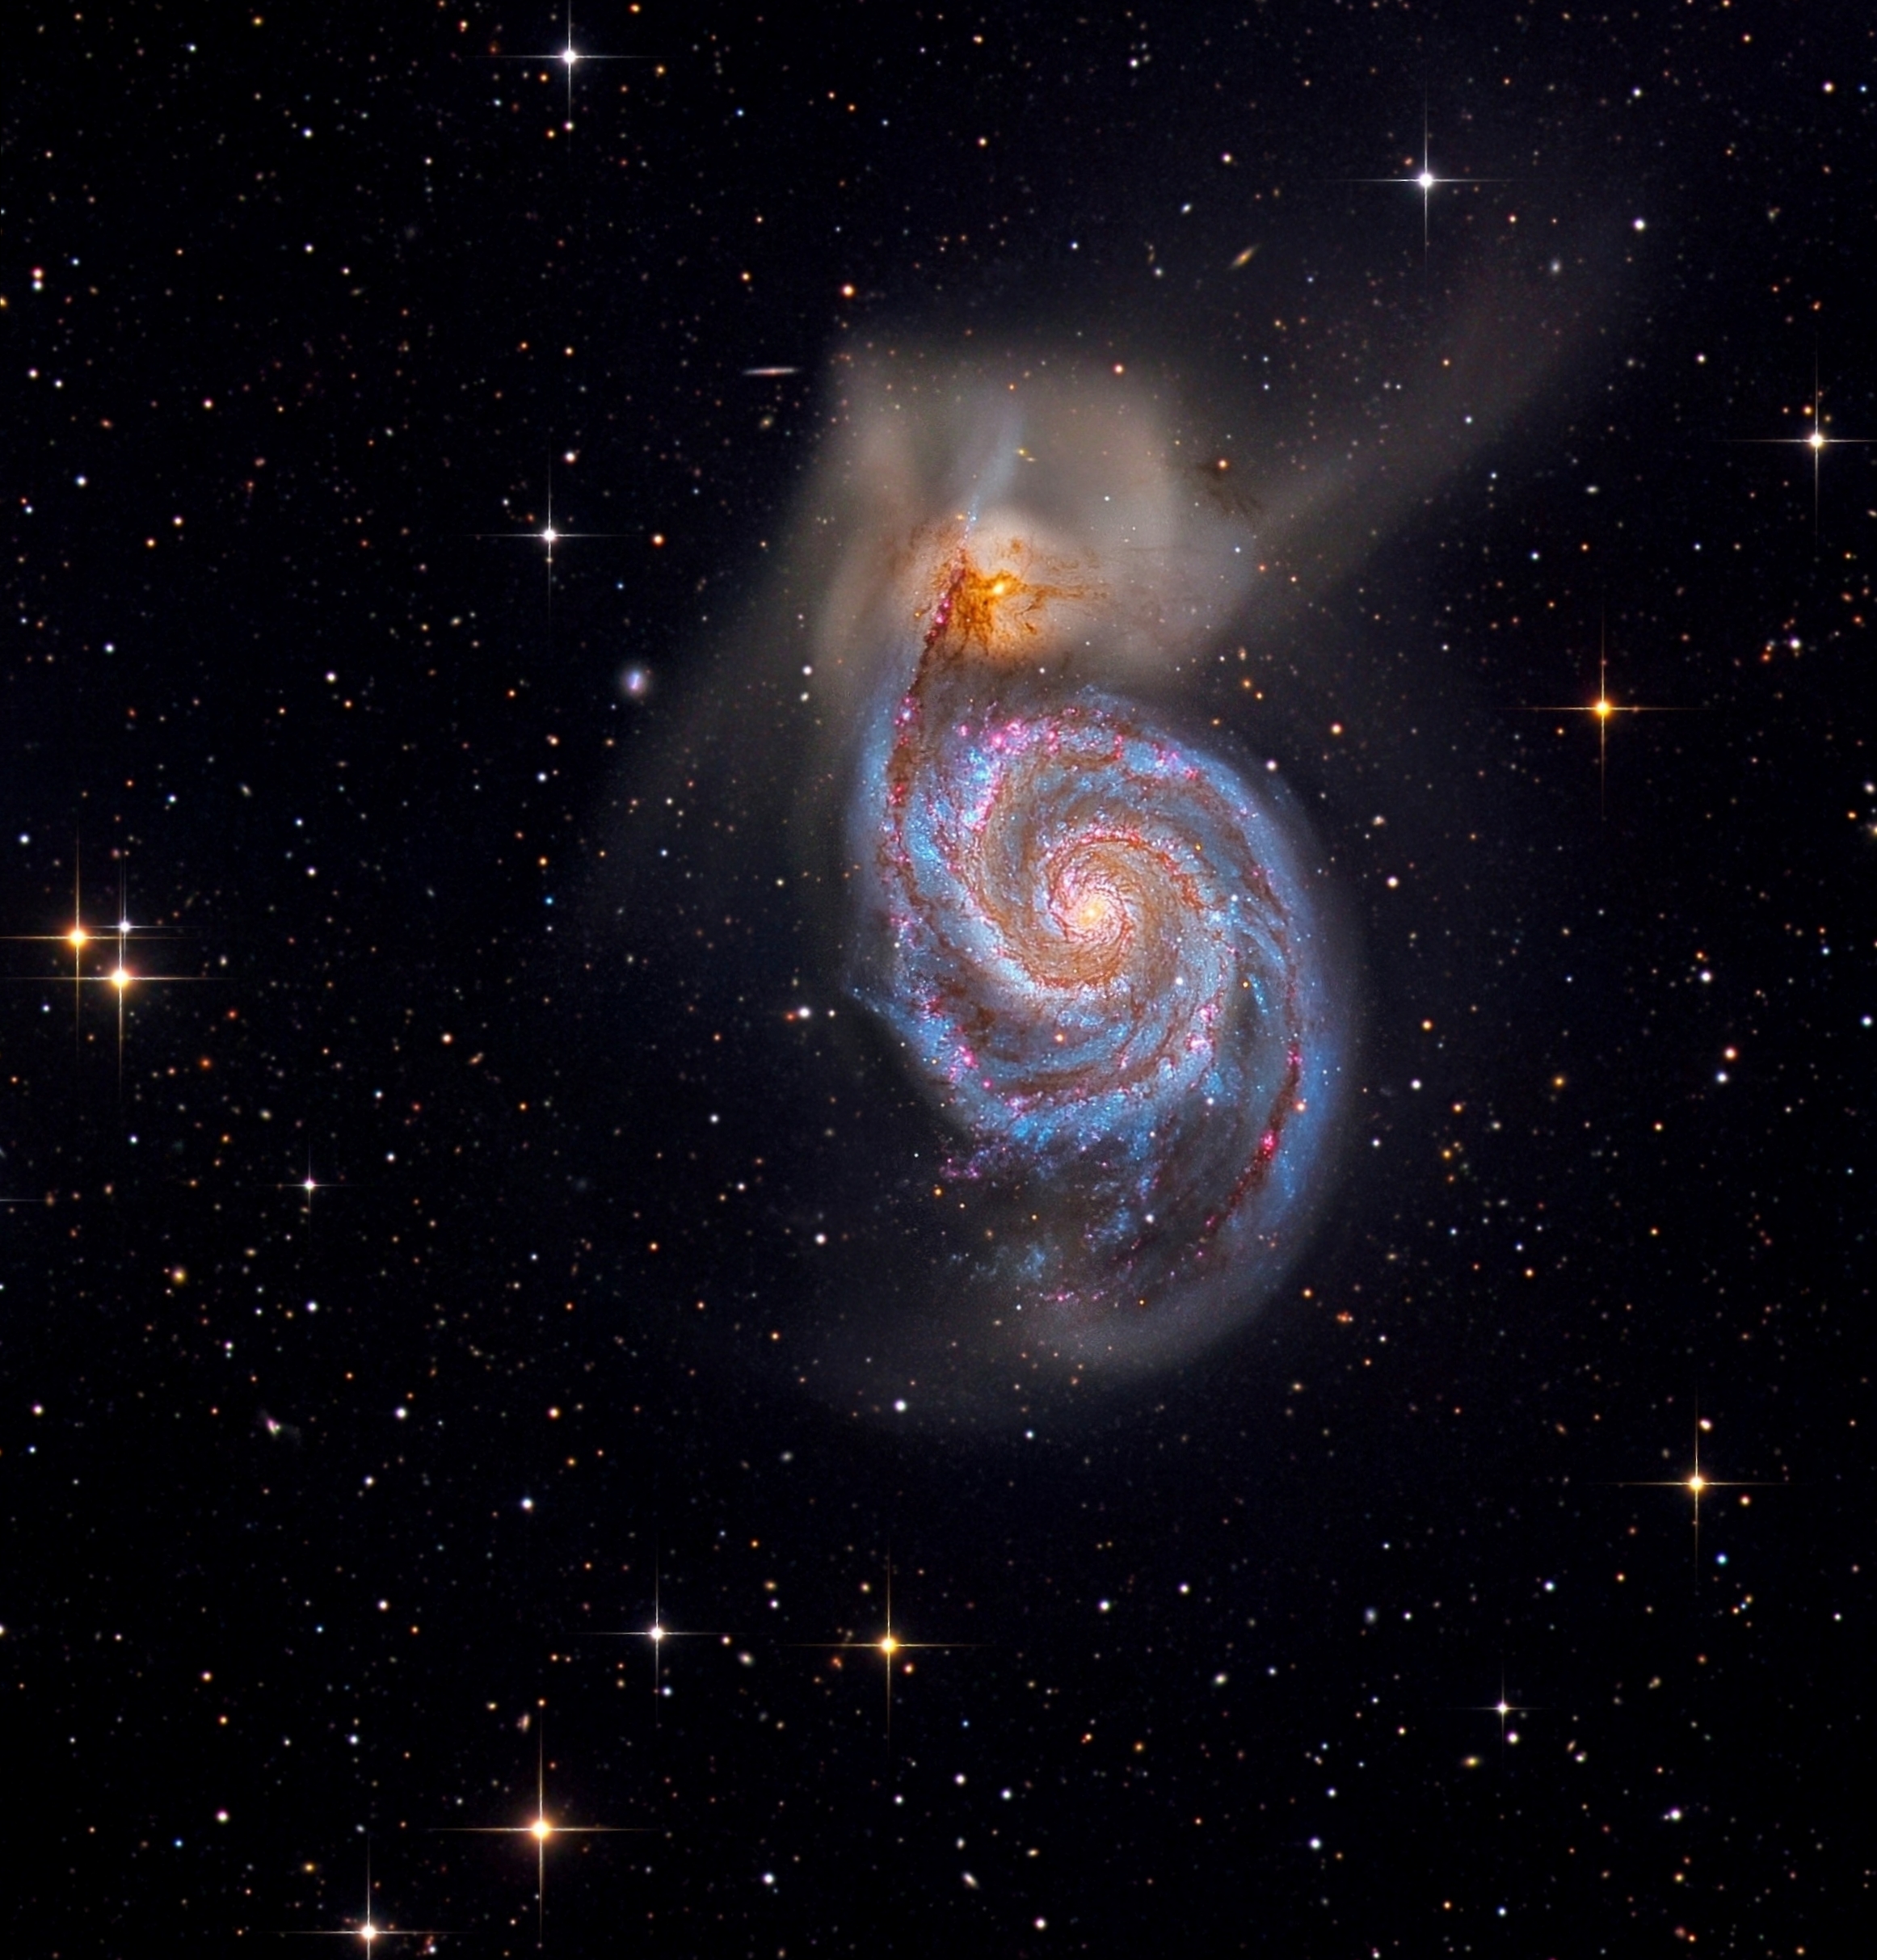 Messier 51 - the Whirlpool Galaxy